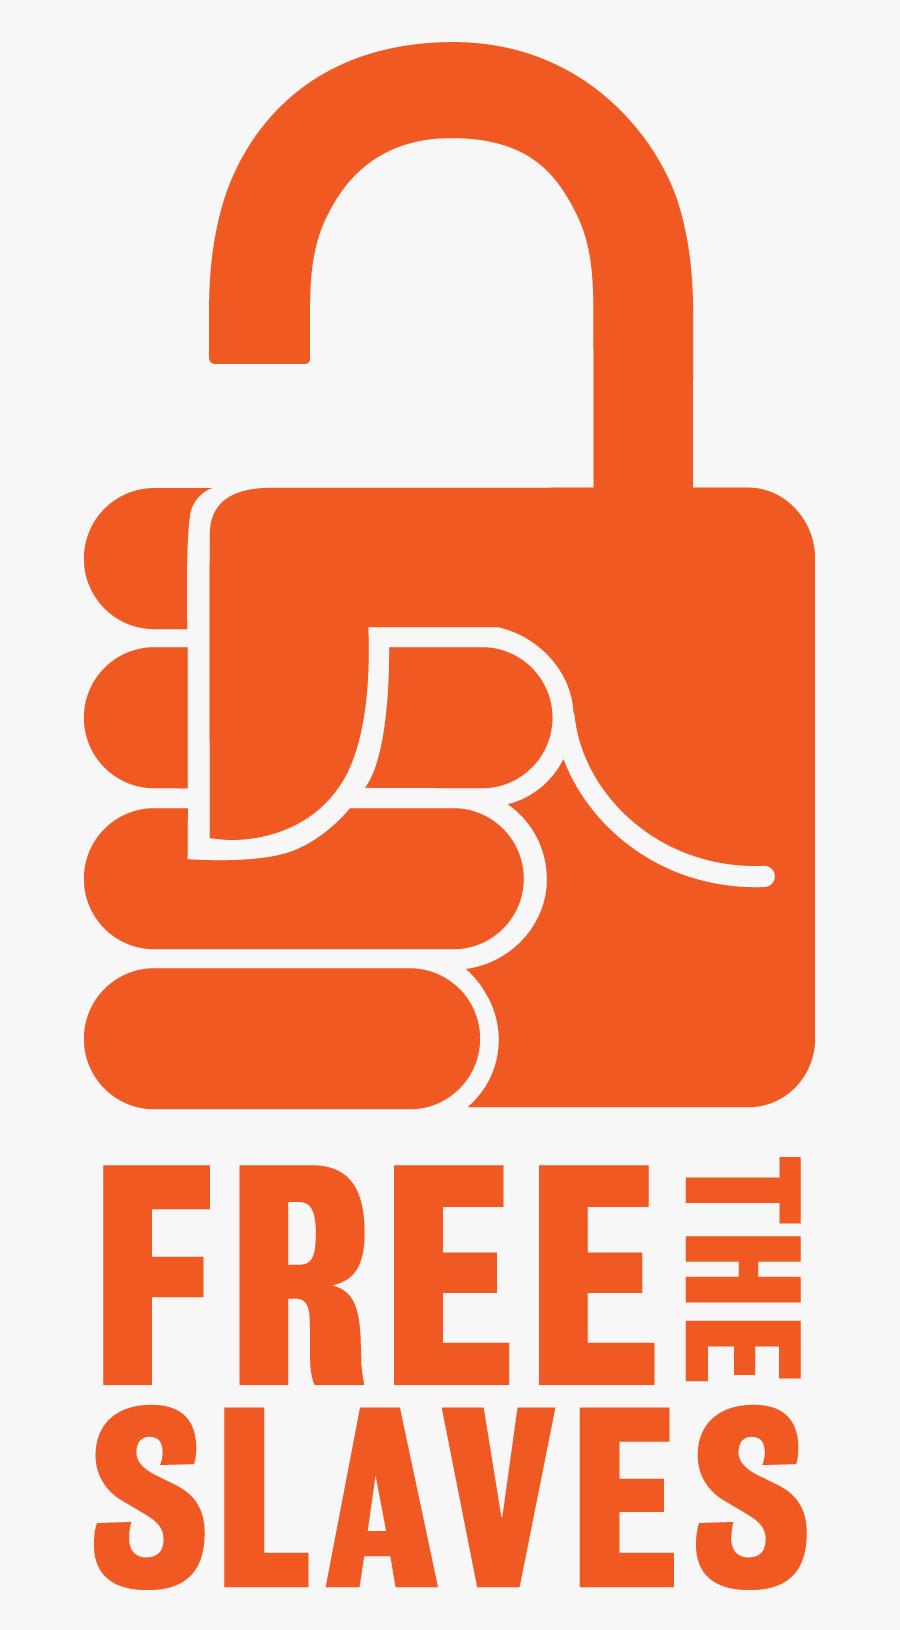 Free The Slaves - Free The Slaves Logo, Transparent Clipart